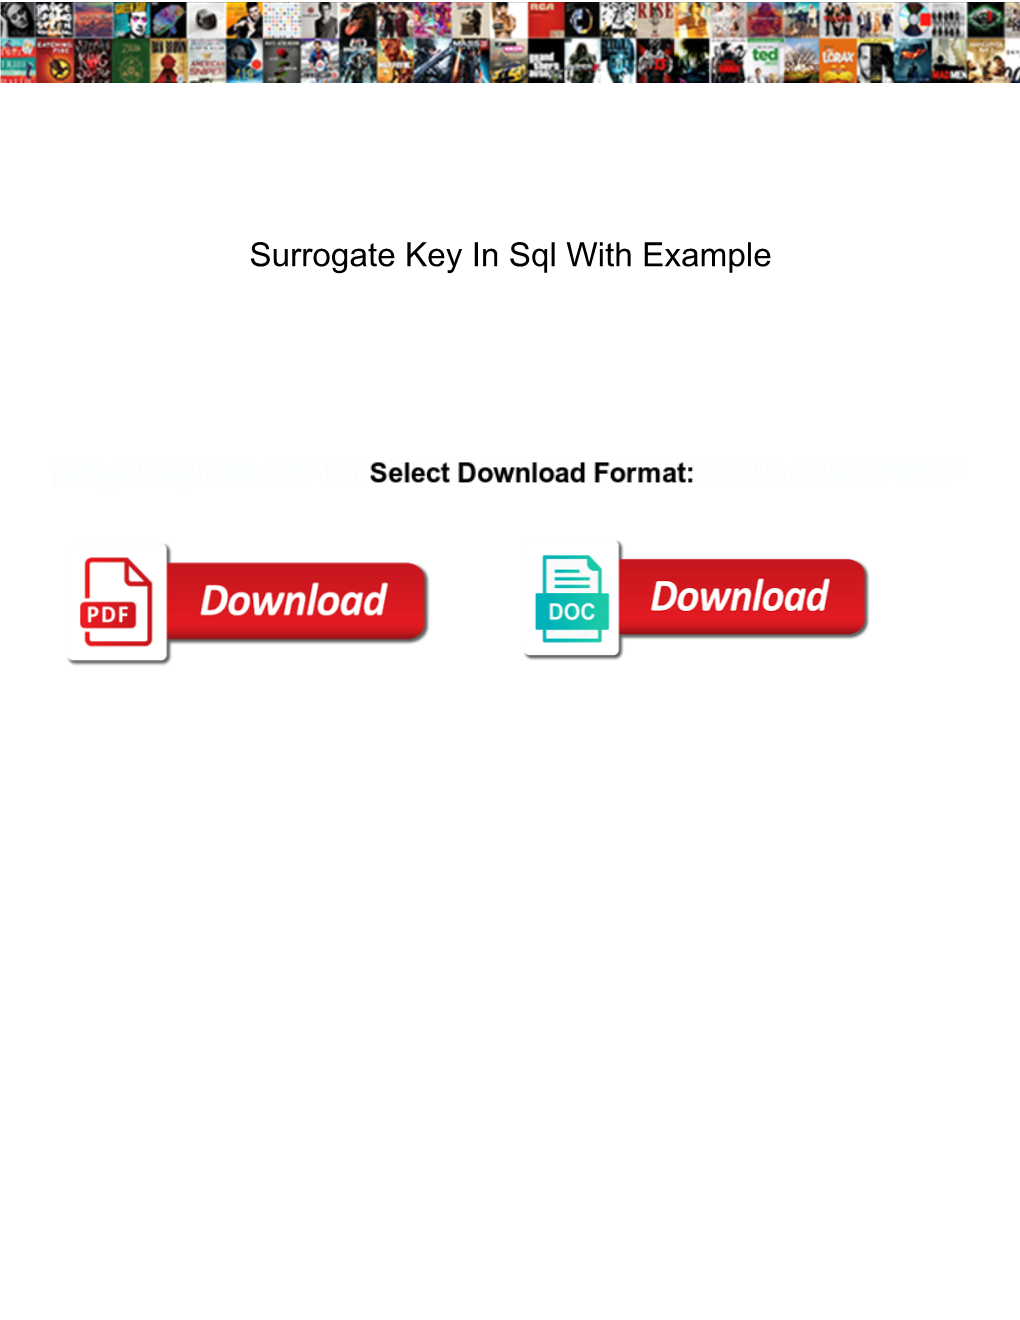 Surrogate Key in Sql with Example